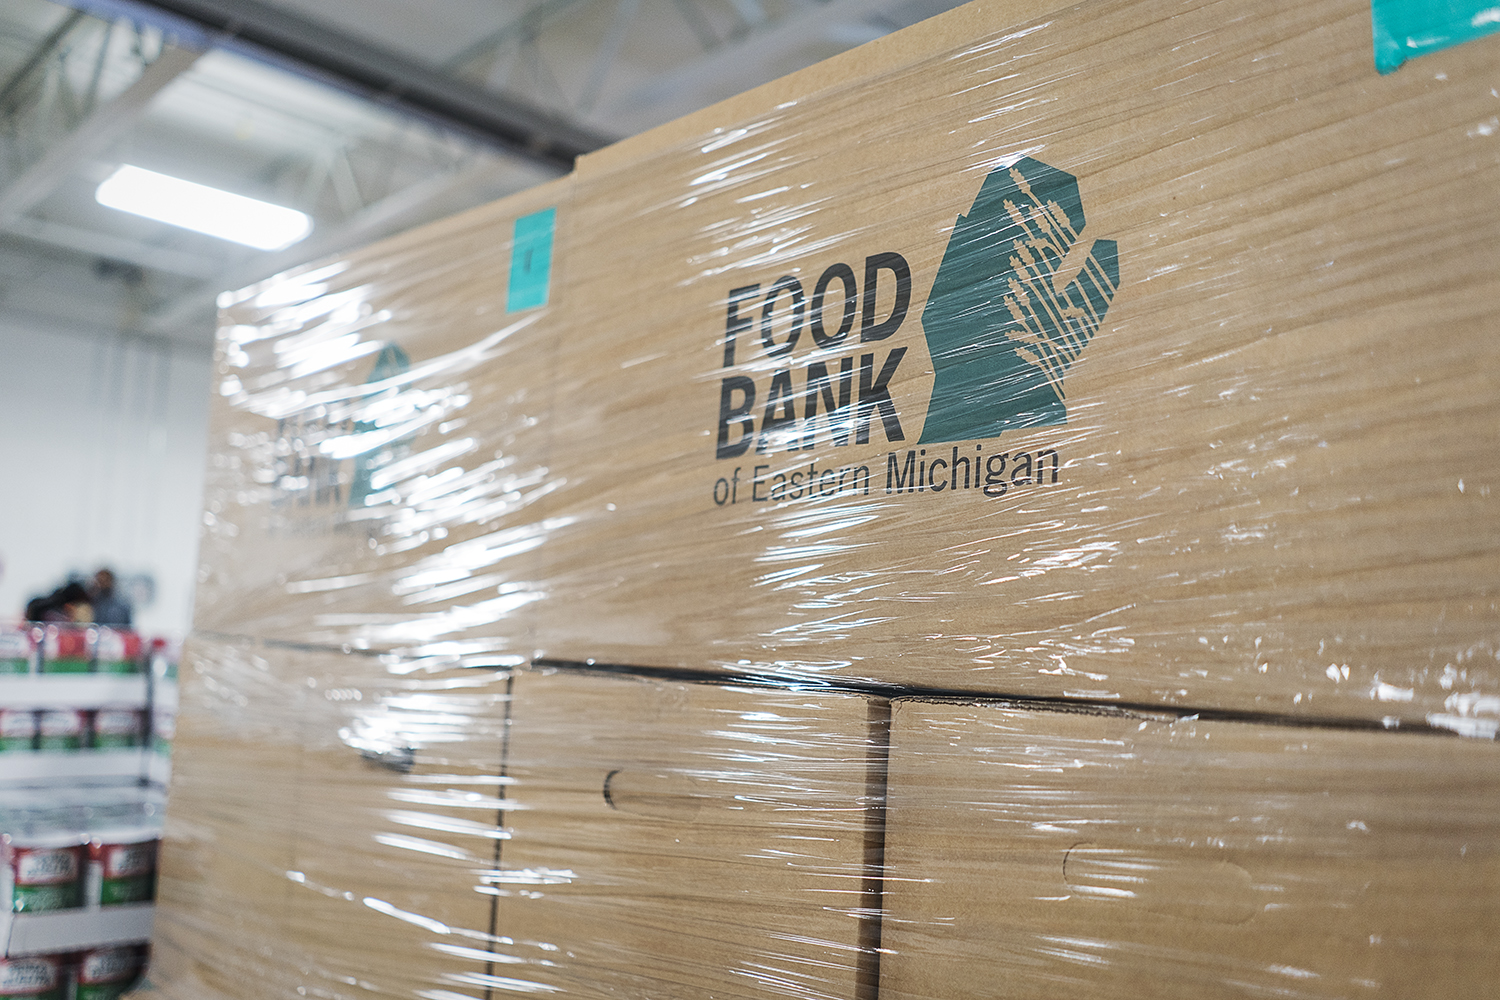 Large boxes full of food for holiday meals await transport at the Food Bank of Eastern Michigan.